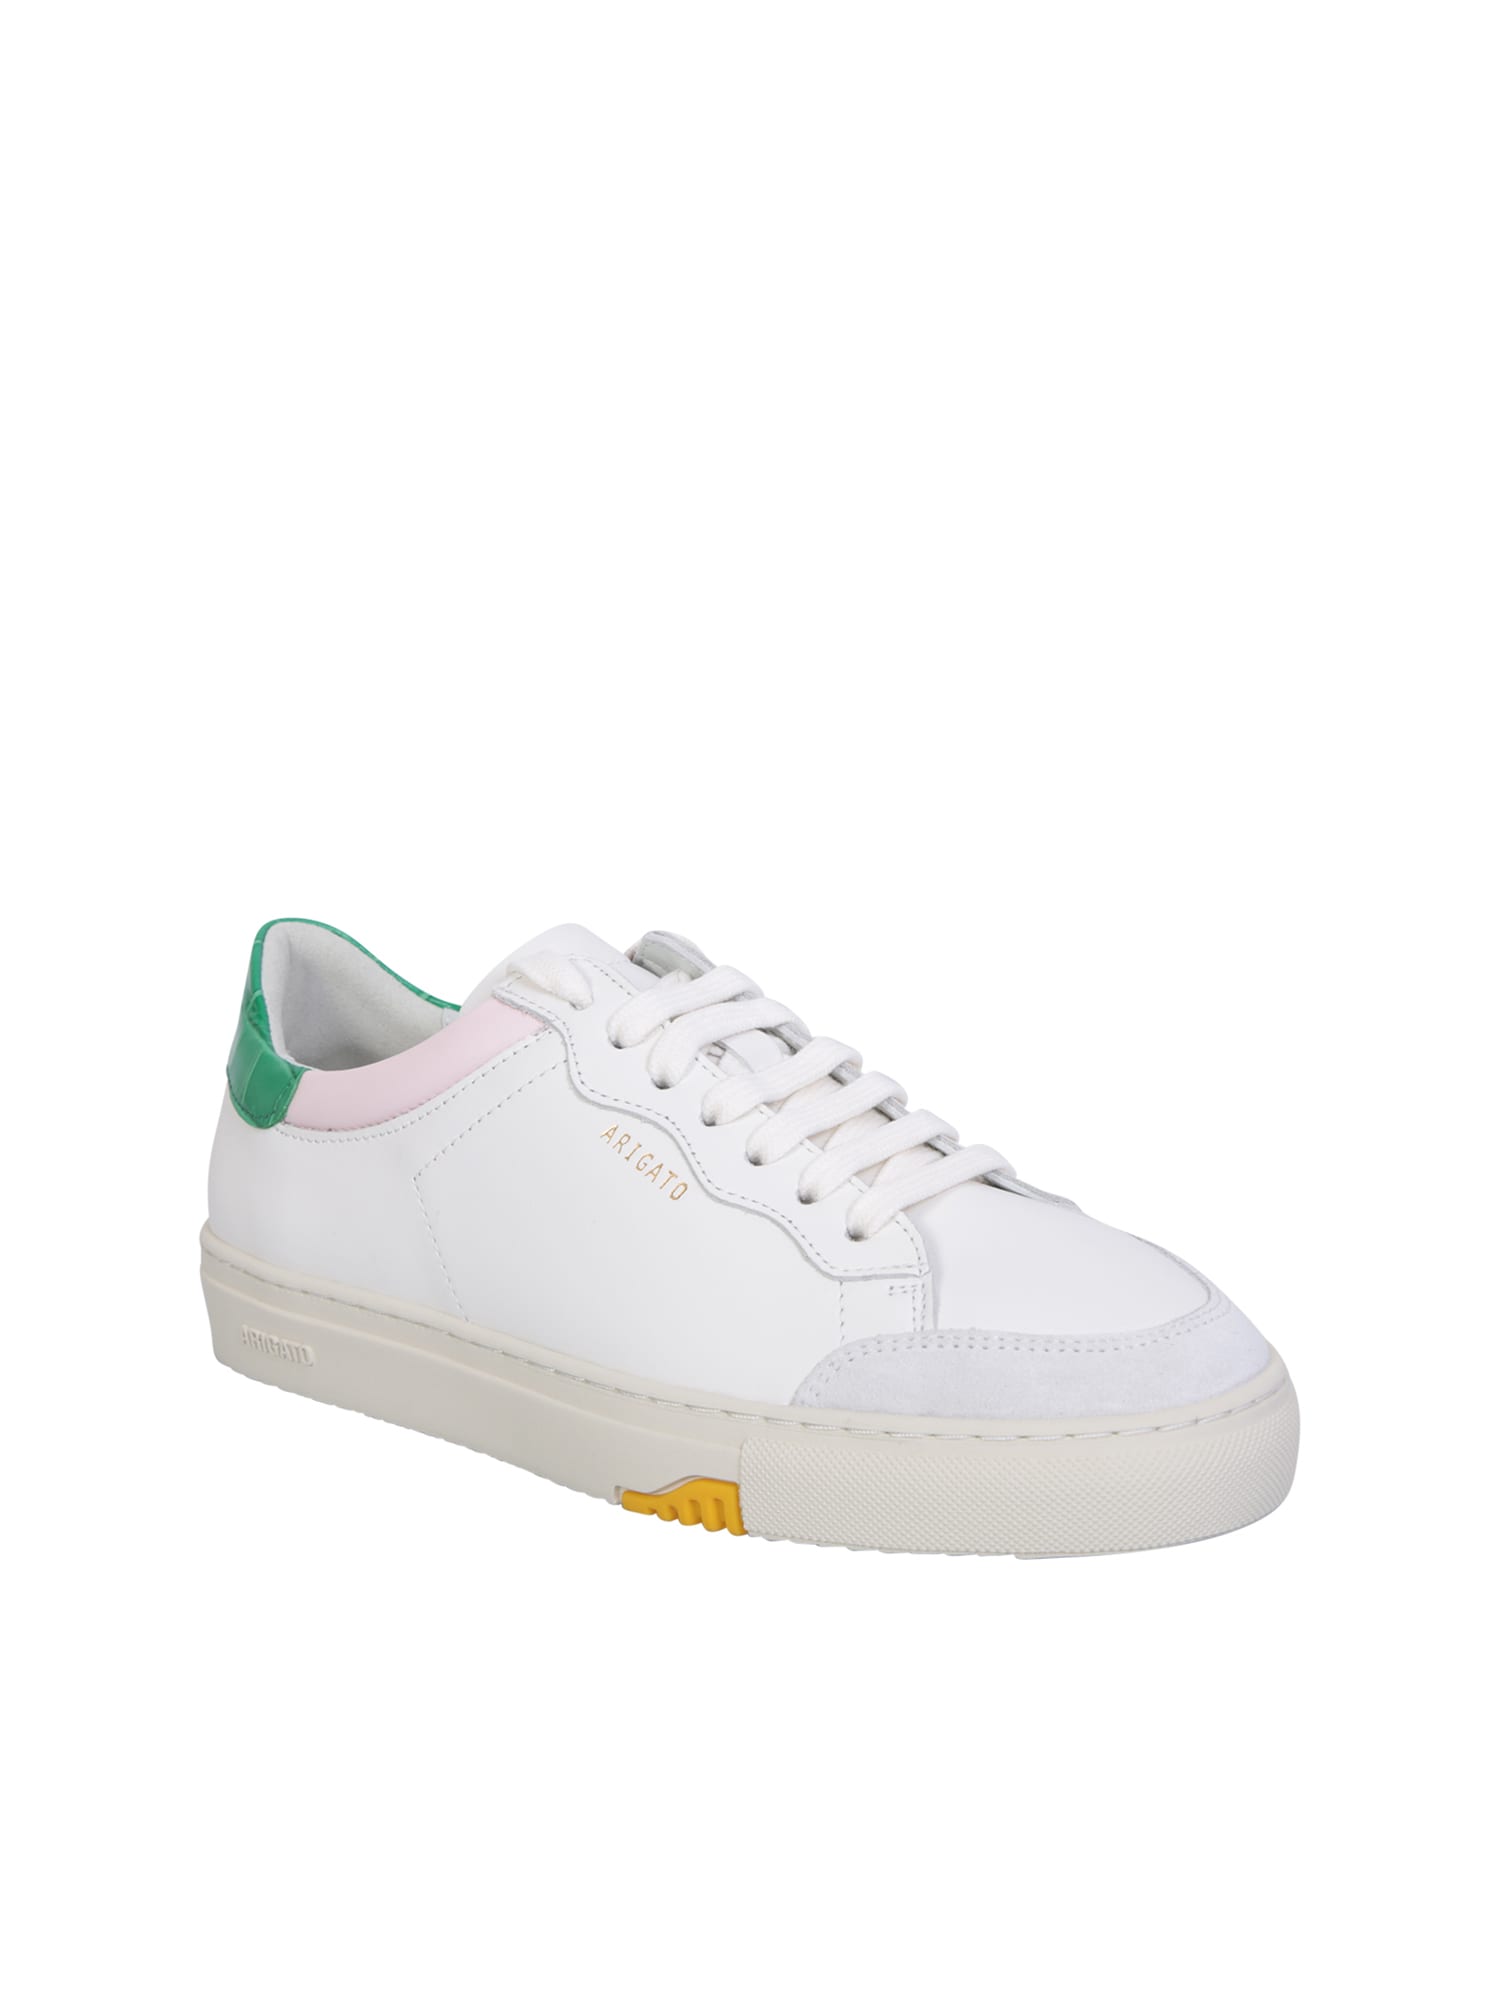 Shop Axel Arigato Clean 180 White/ Green Sneakers